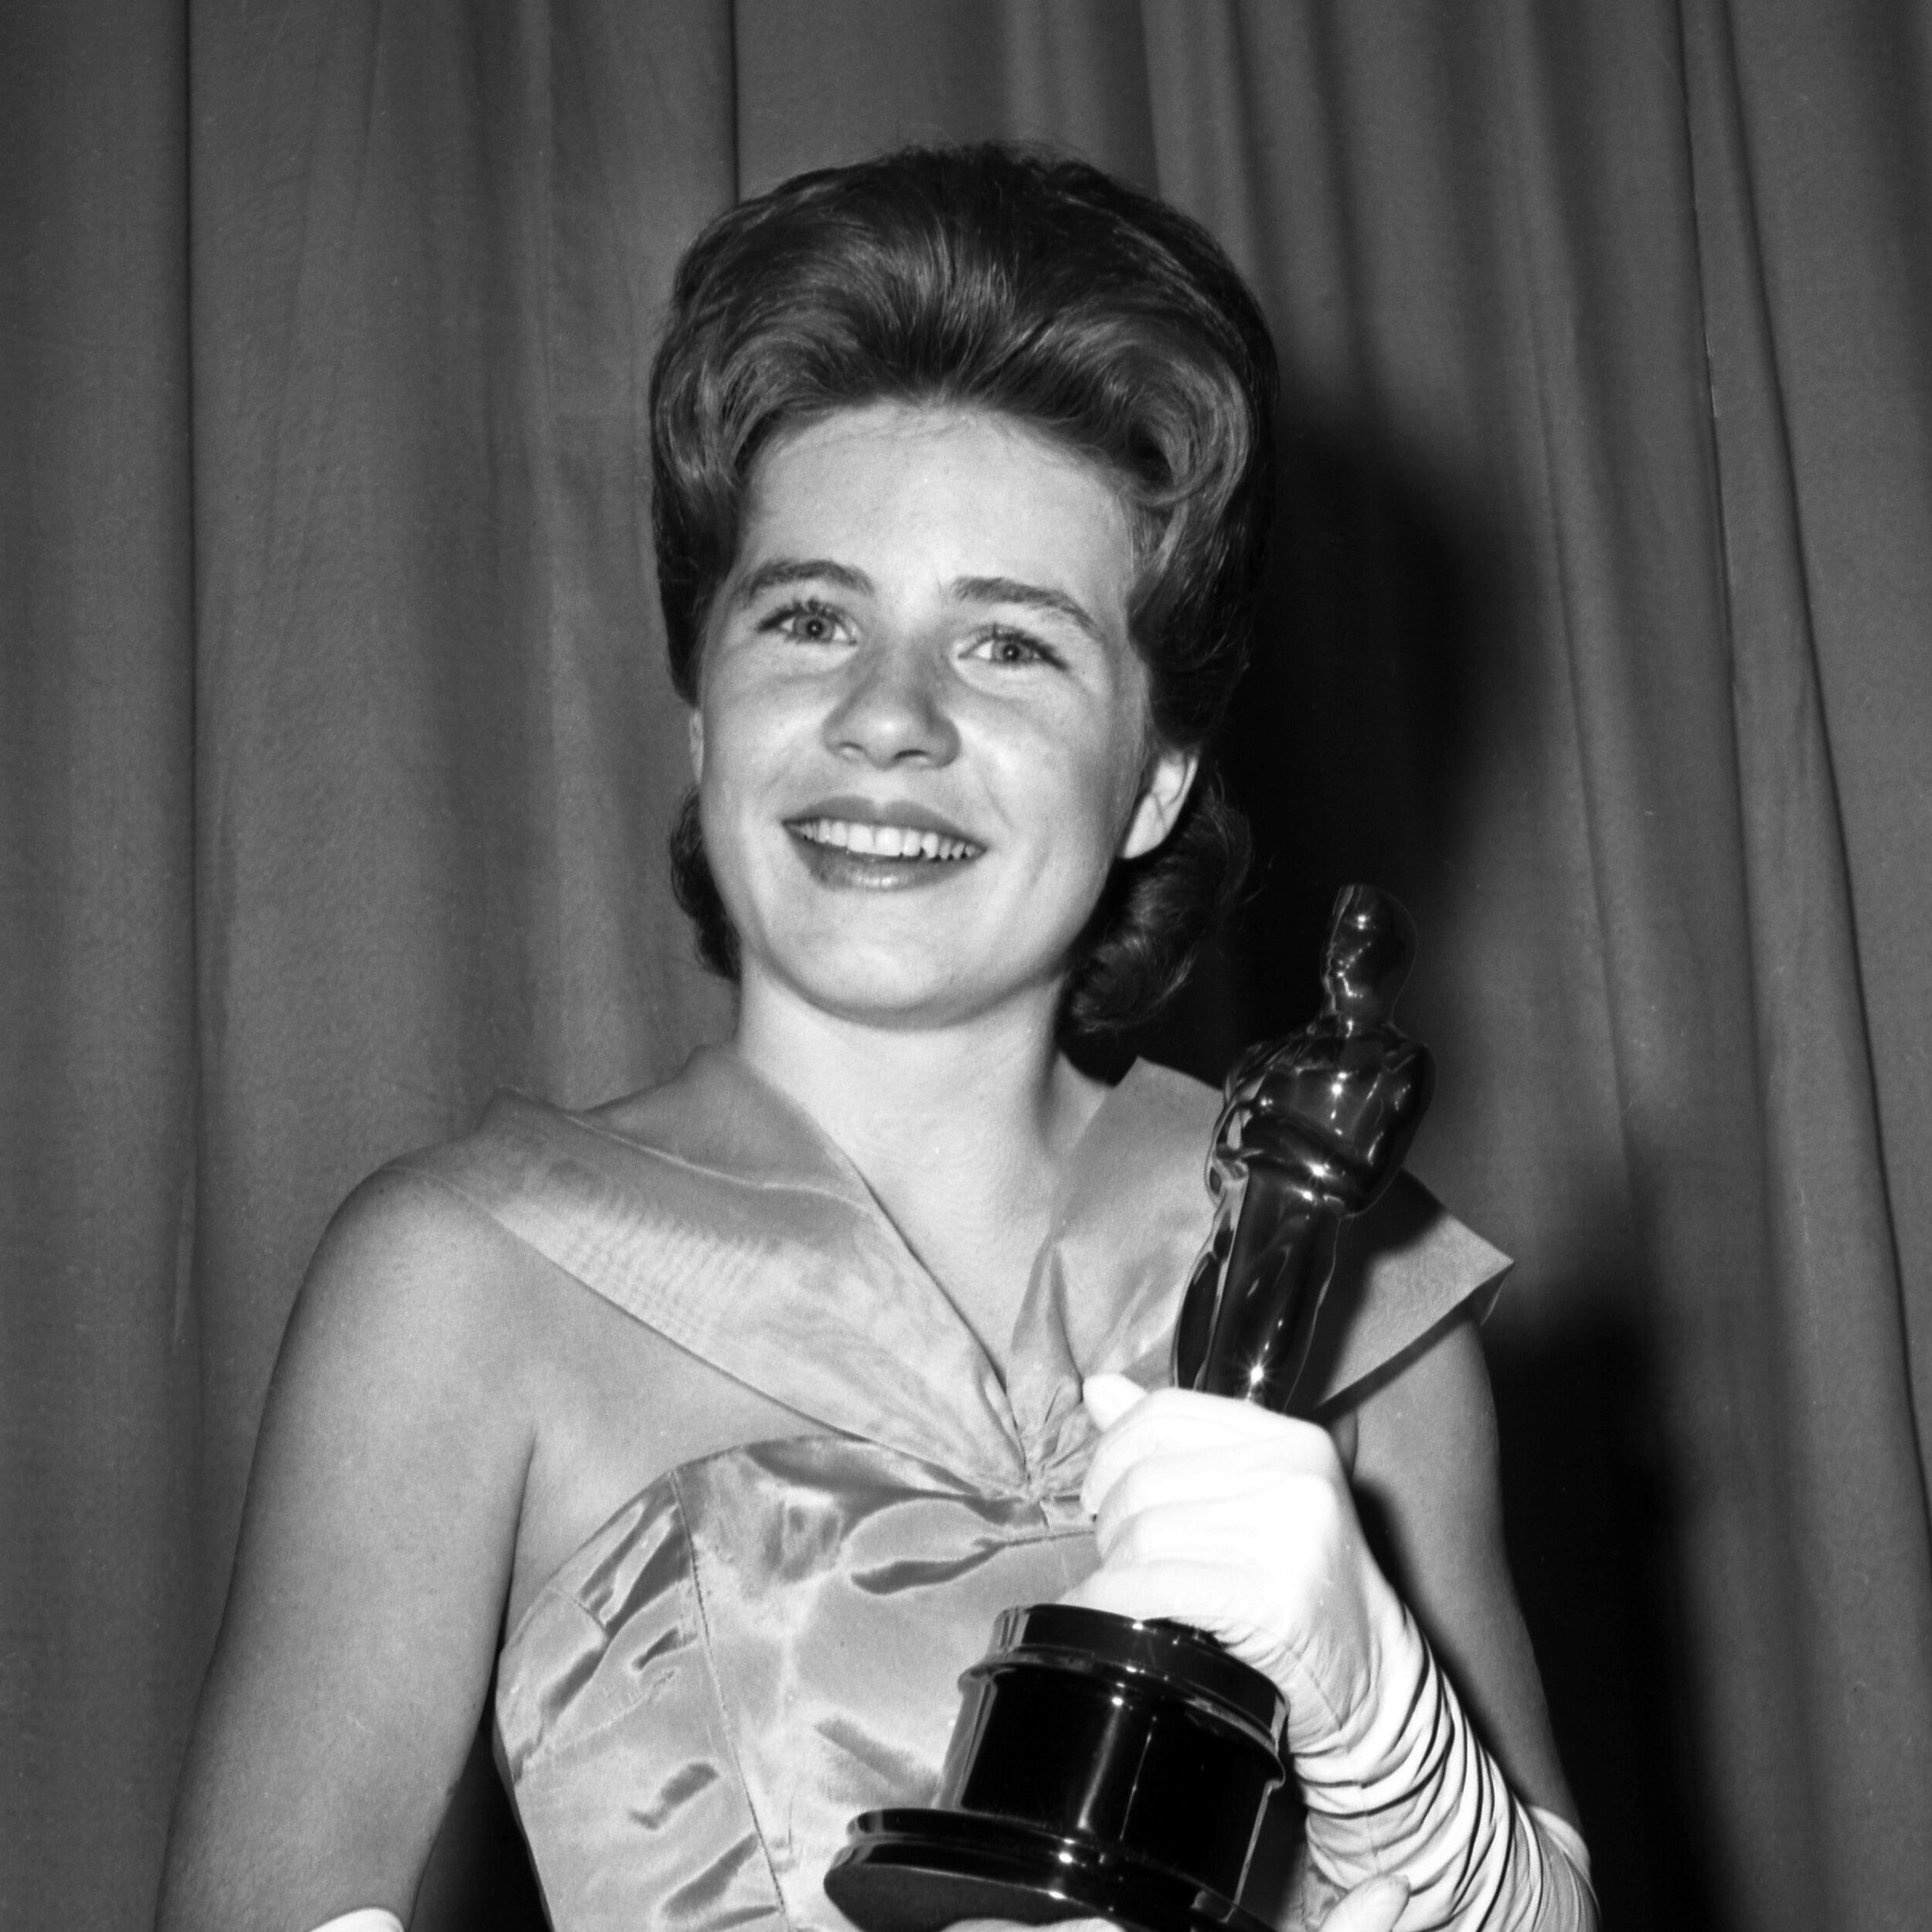 Patty Duke, Actress, won Oscar for "The Miracle Worker" at age 16...